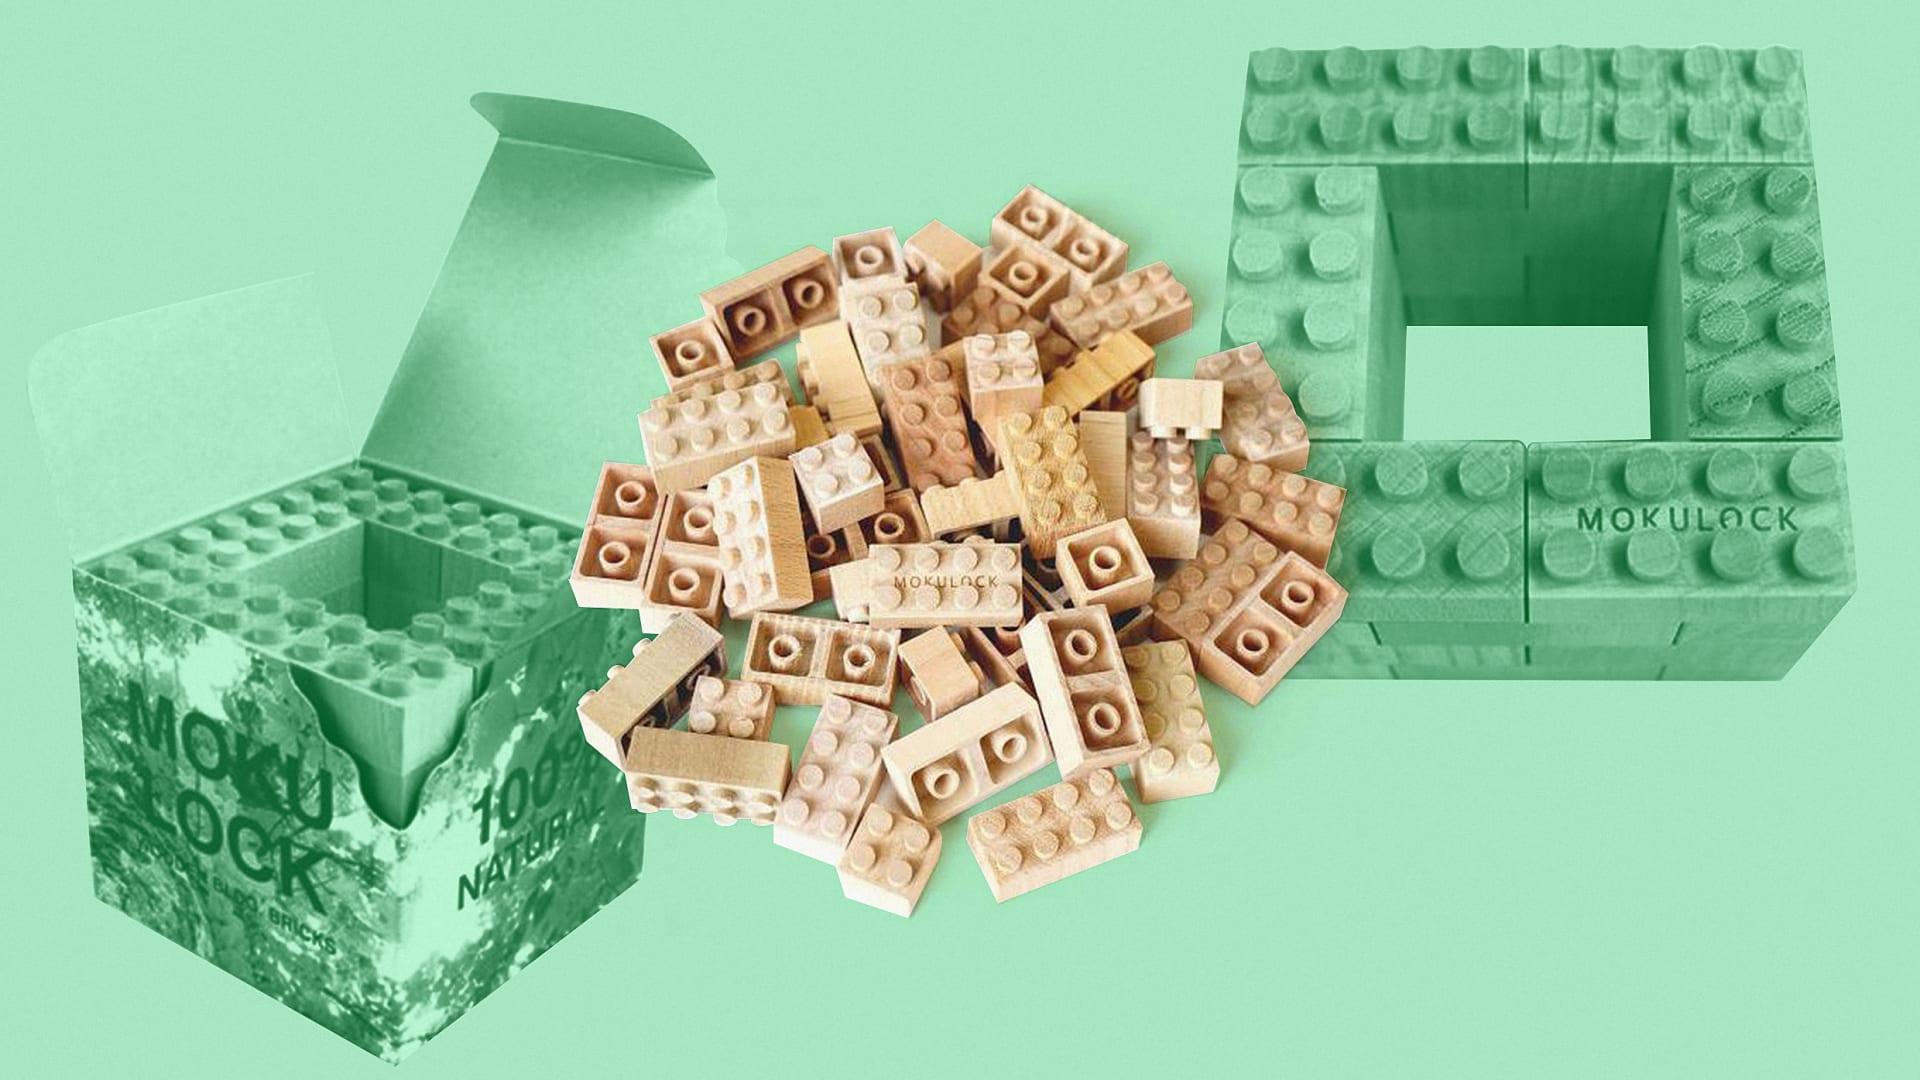 Lego bricks are terrible for the environment. These wooden alternatives biodegrade